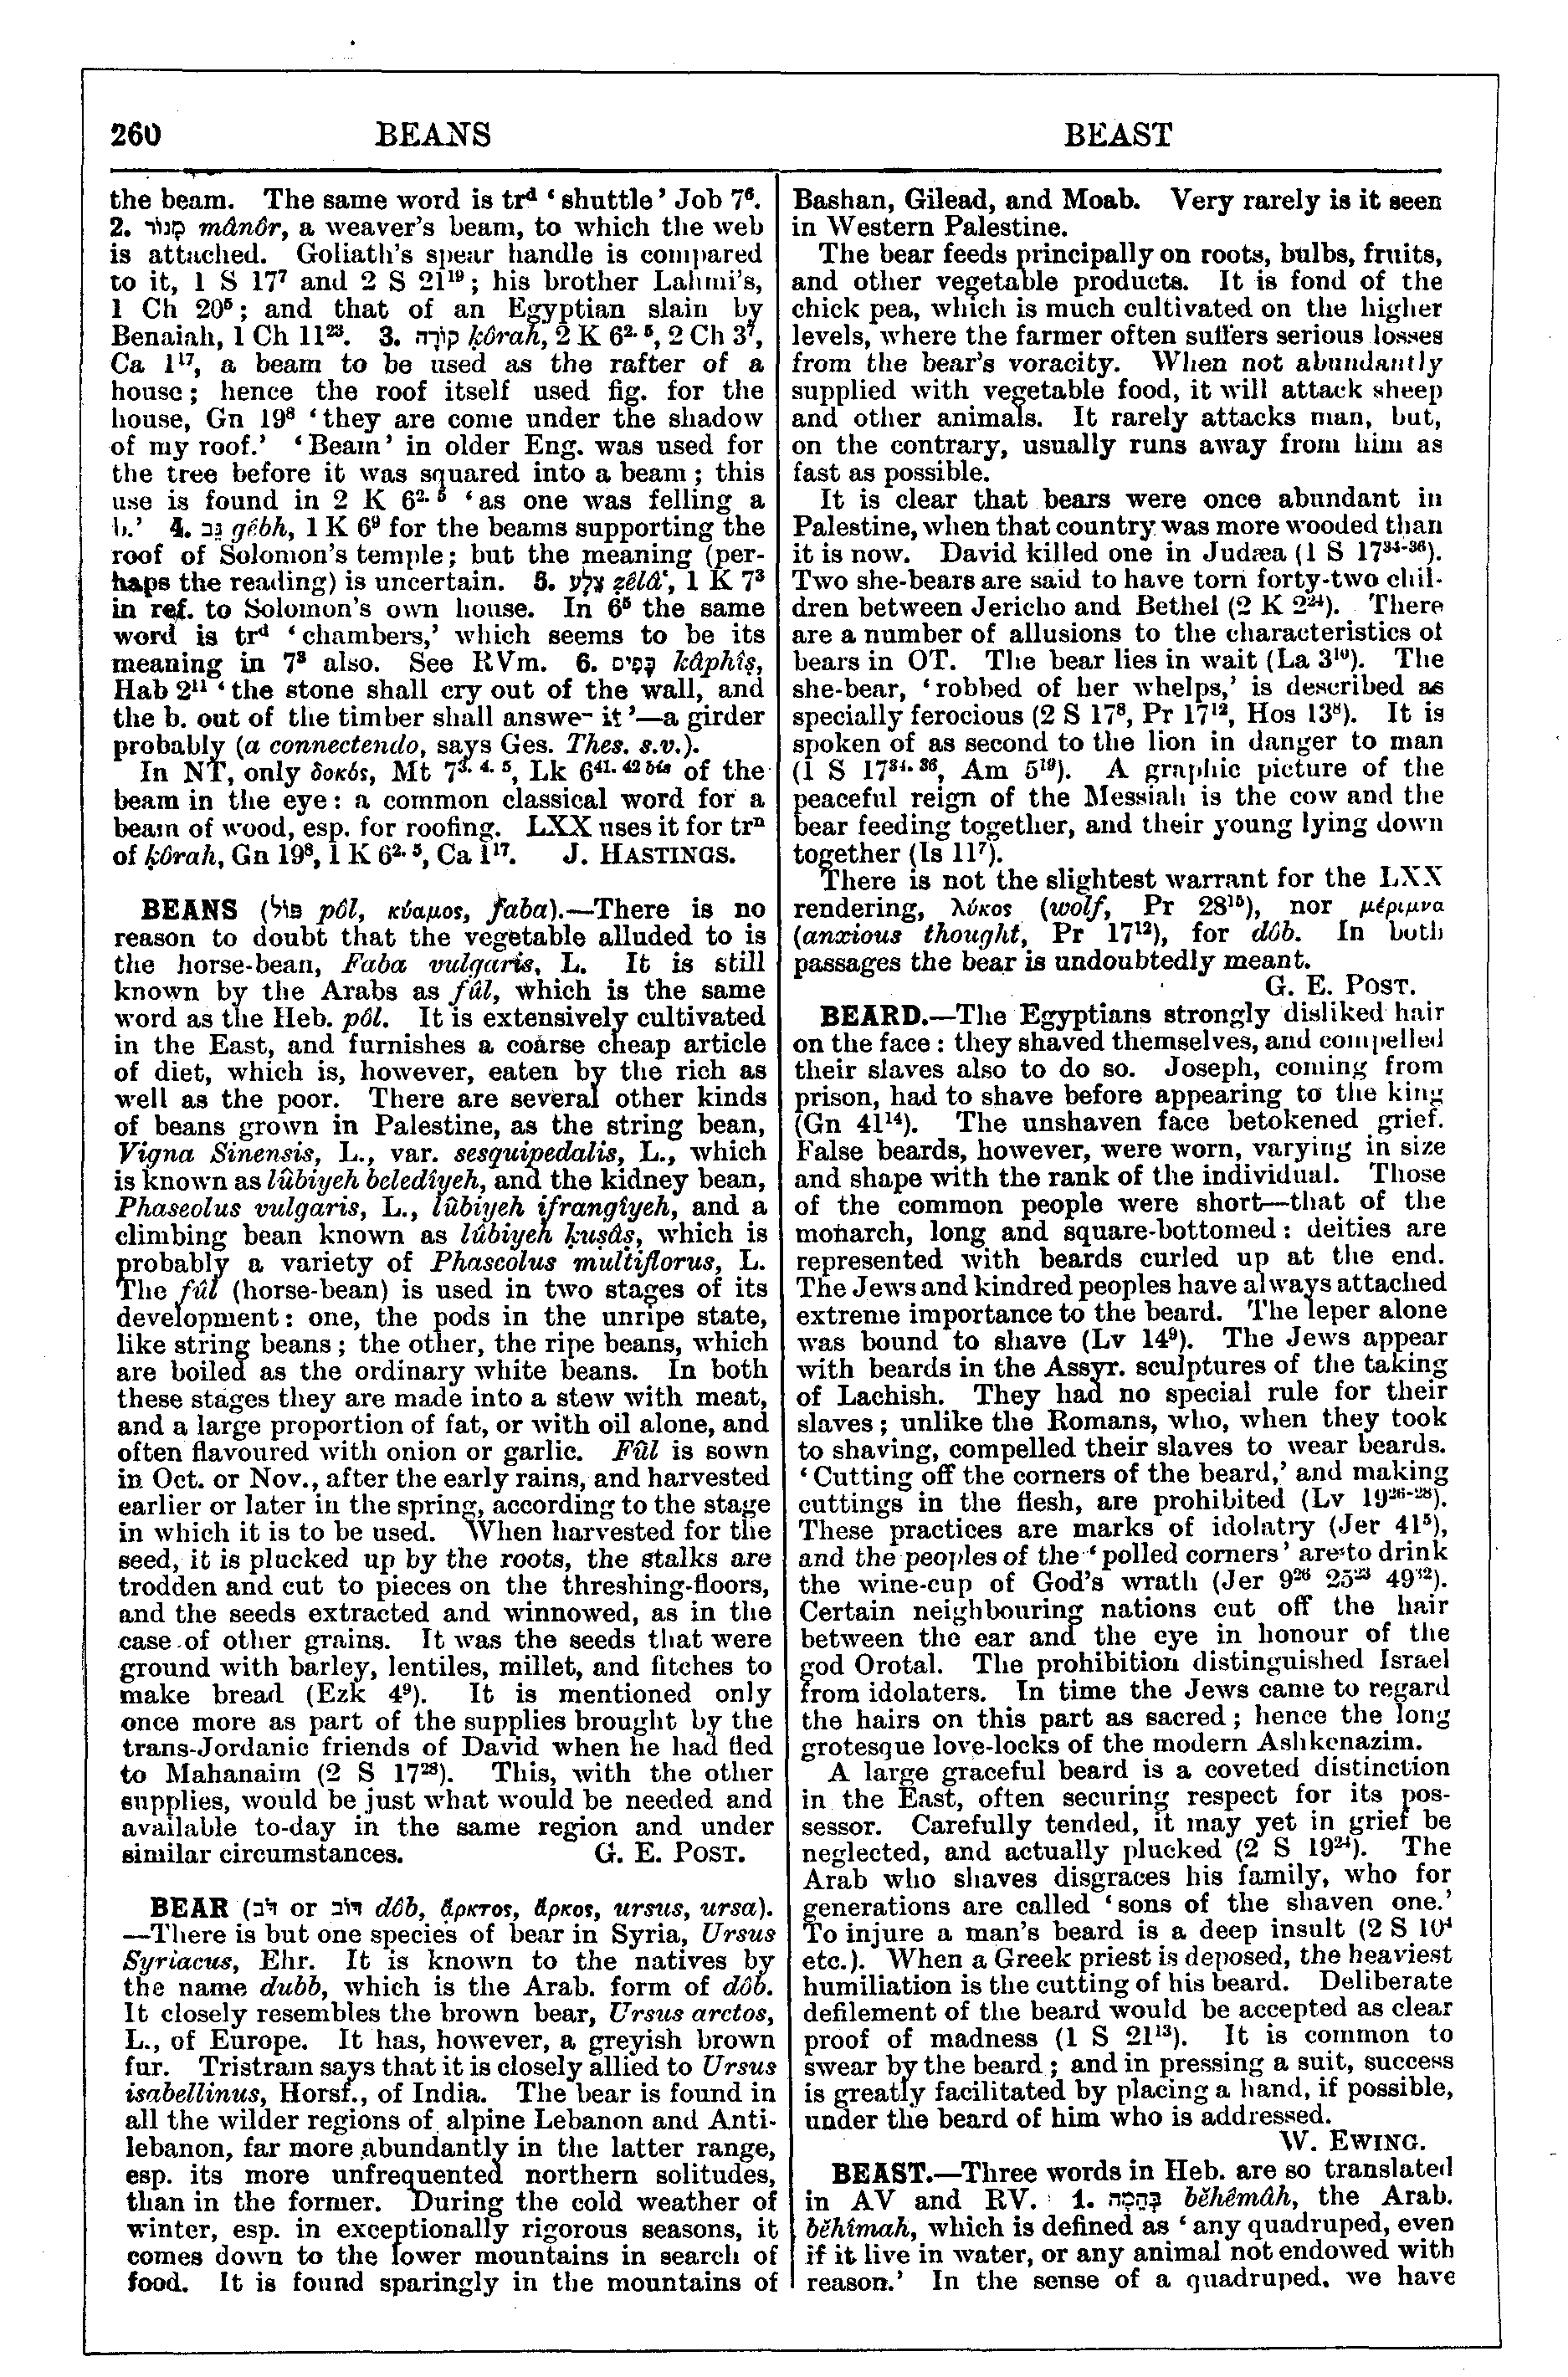 Image of page 260